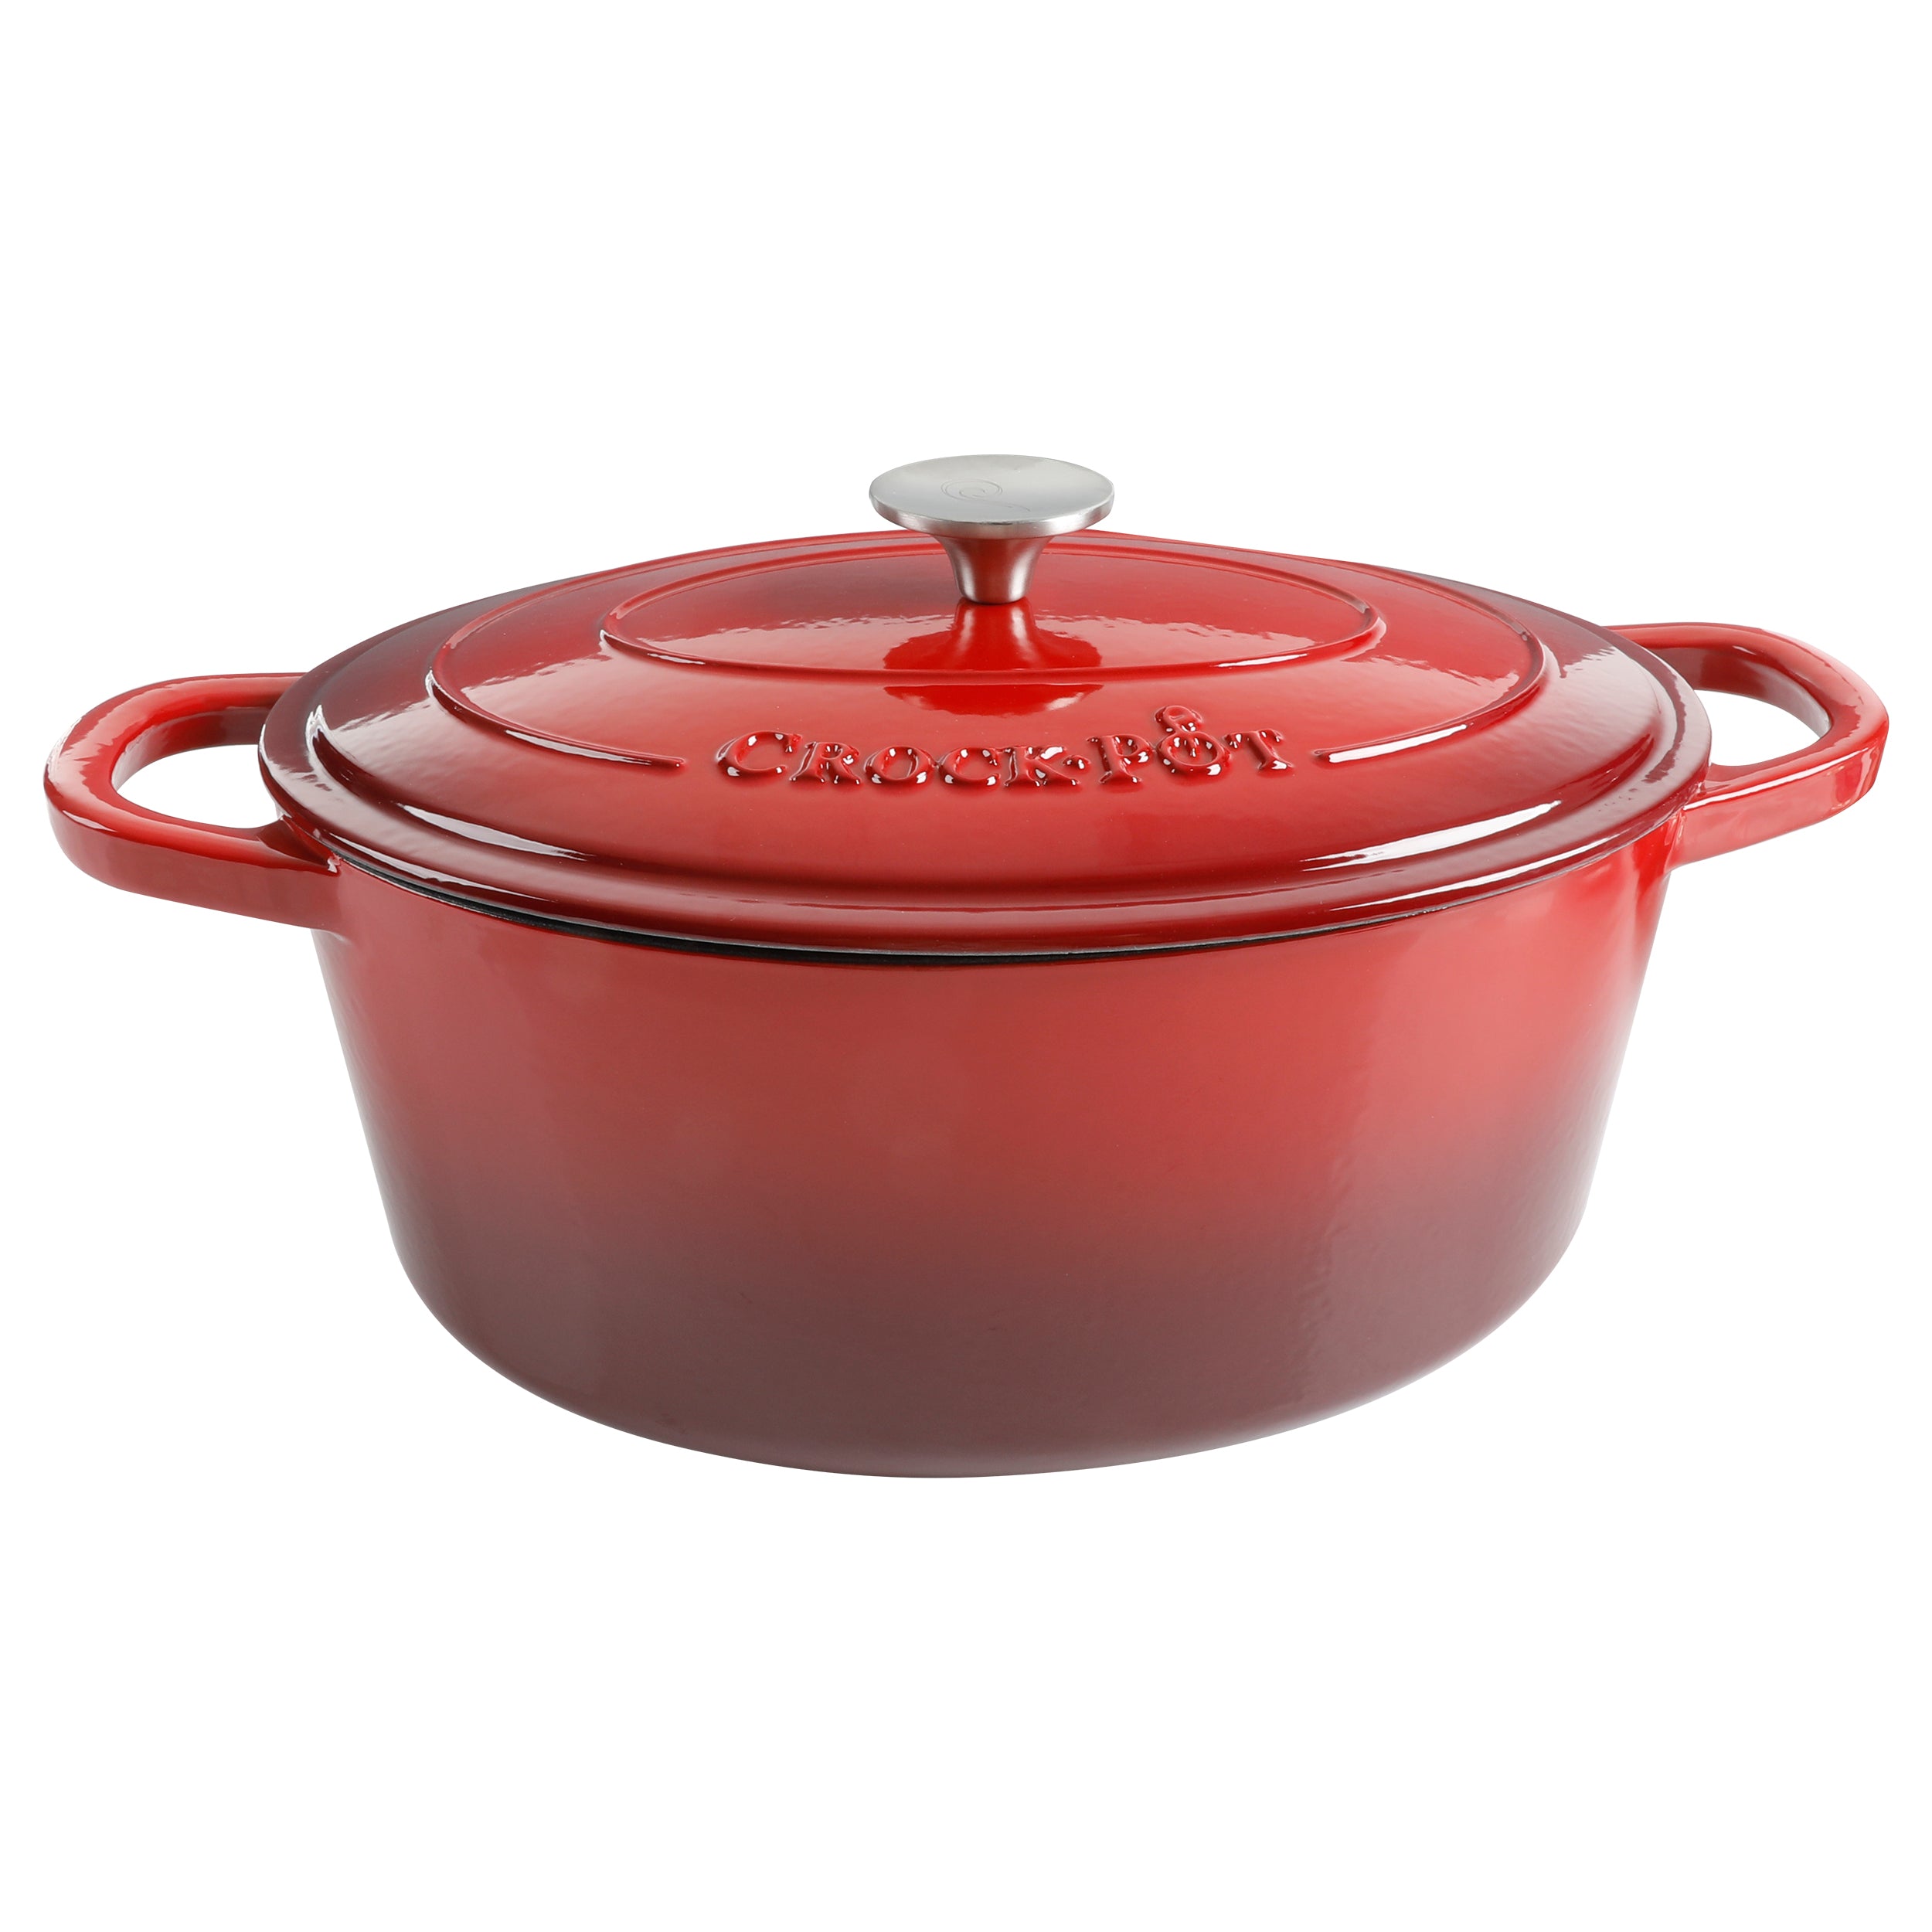 Martha Stewart Enameled Cast Iron 7-Quart Dutch Oven with Lid in Red -  20587334